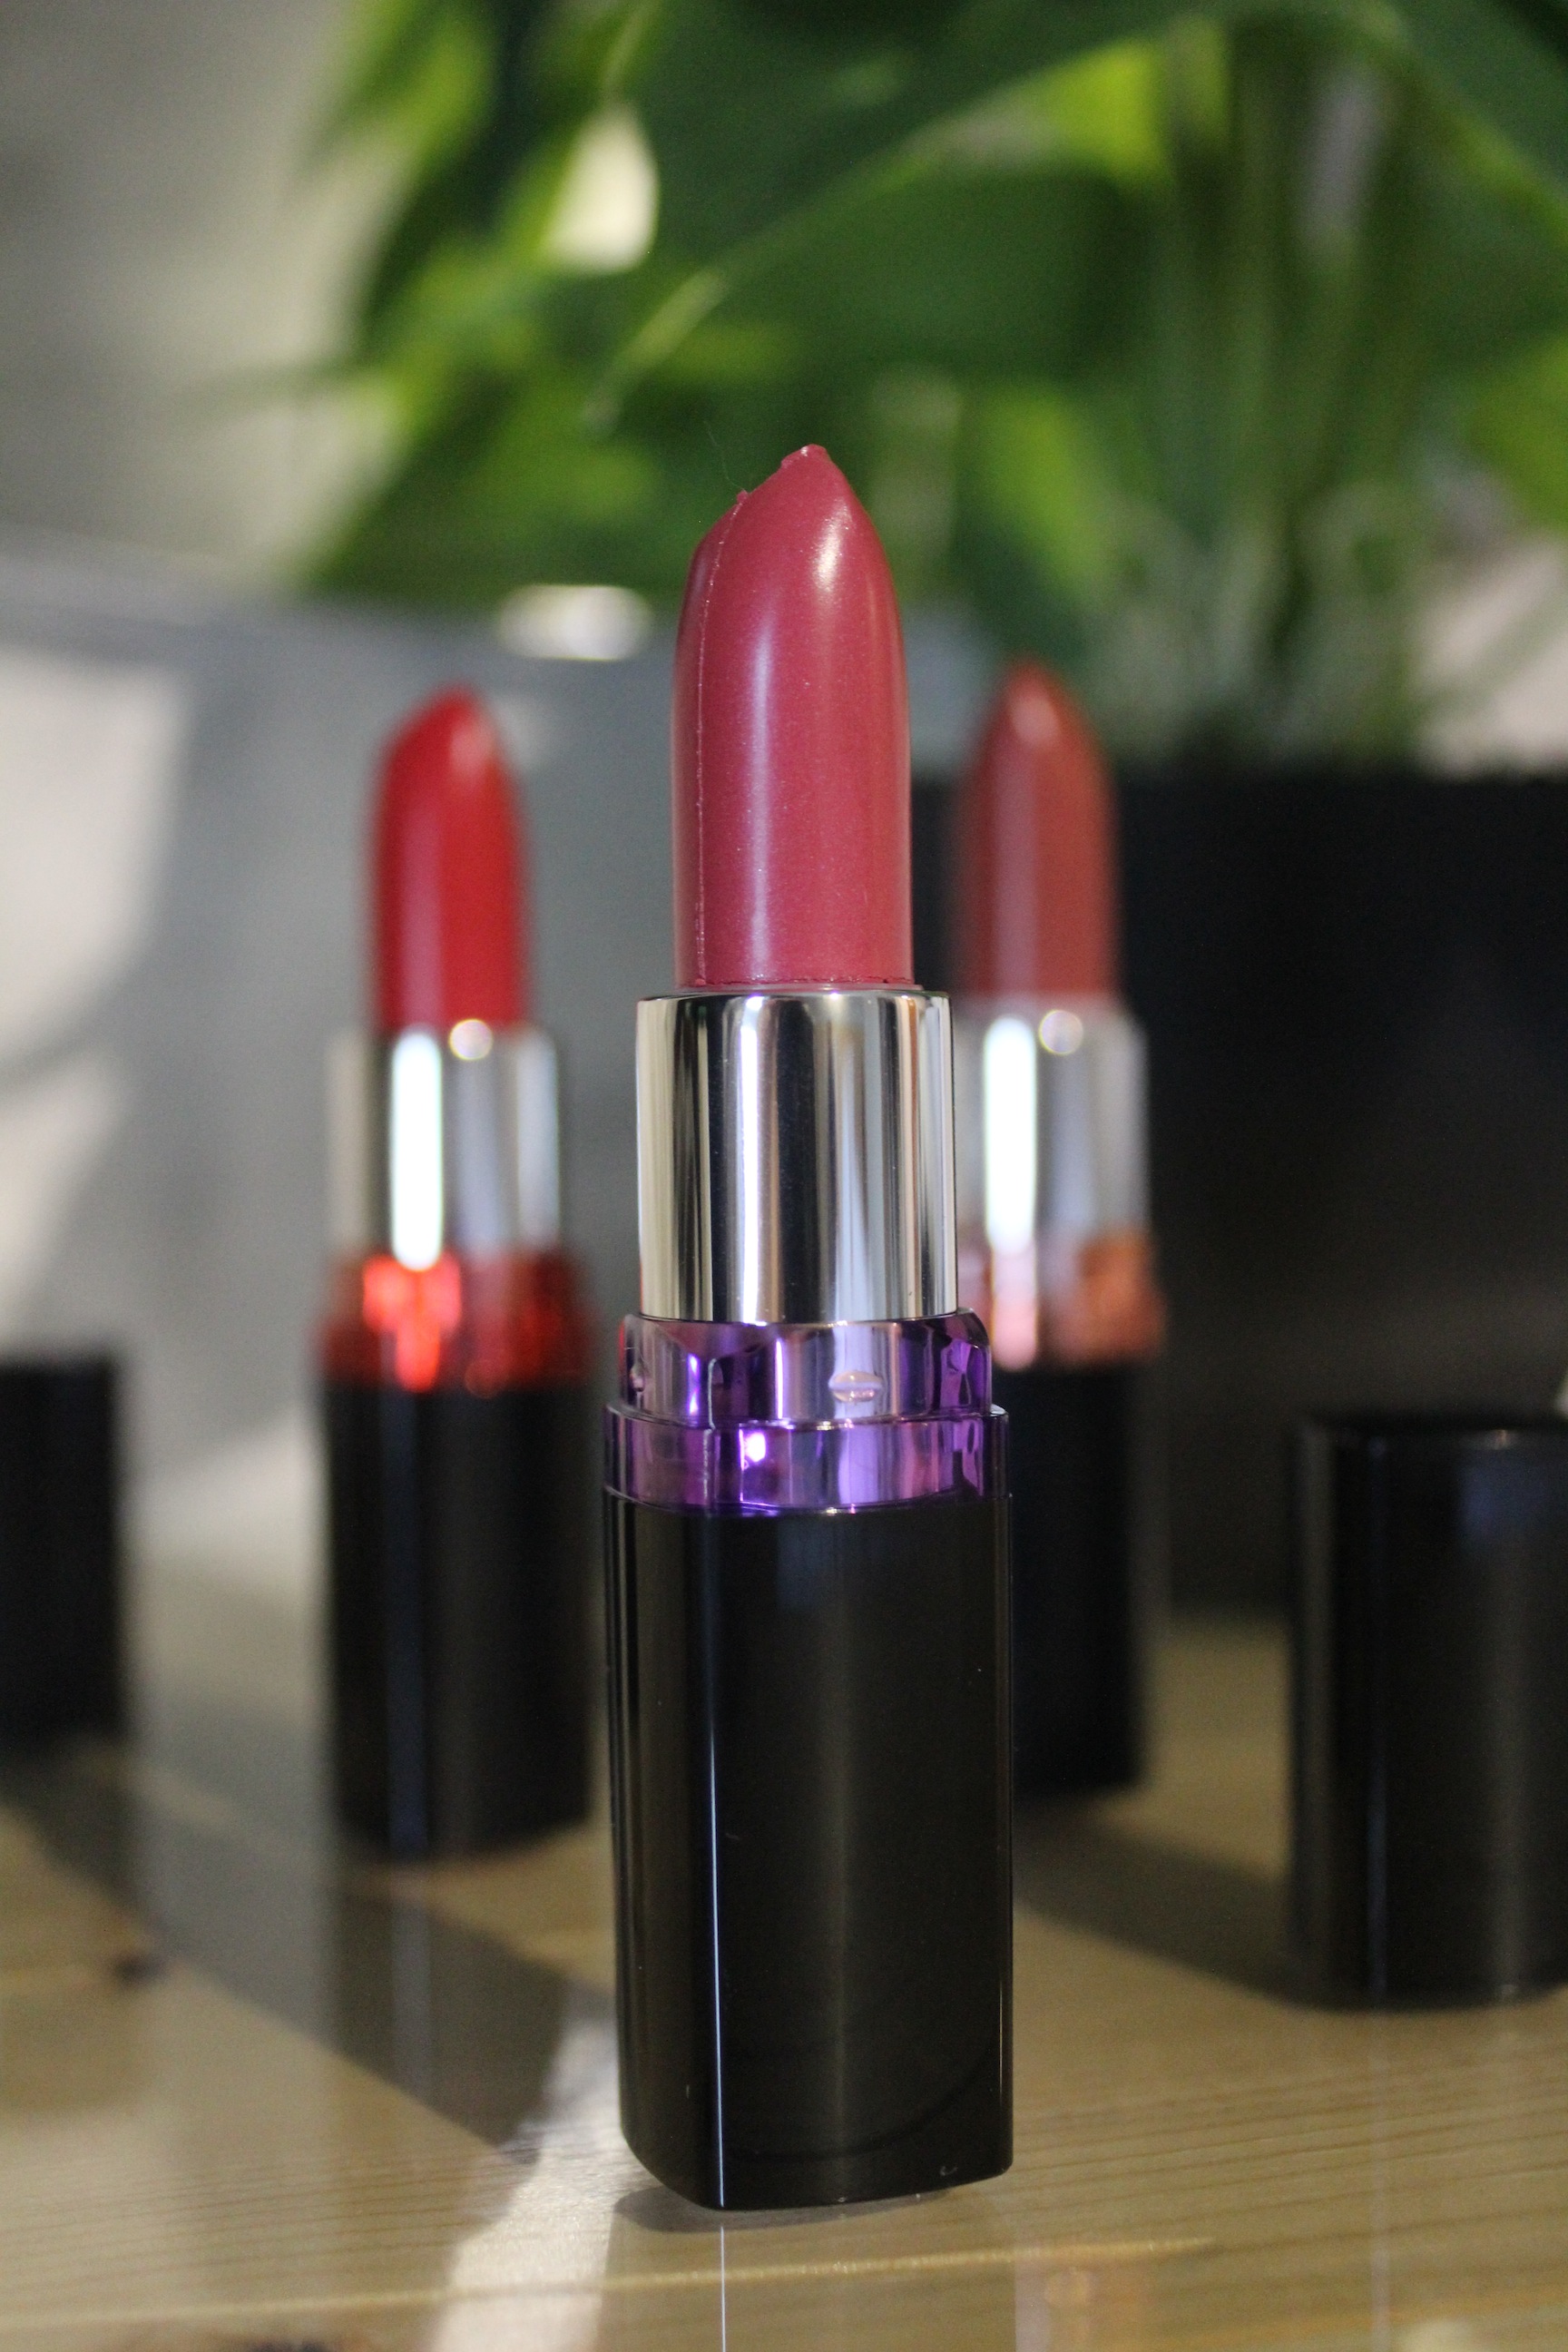 Maybelline Color Show Lipstick in 'Sweet Orchid'